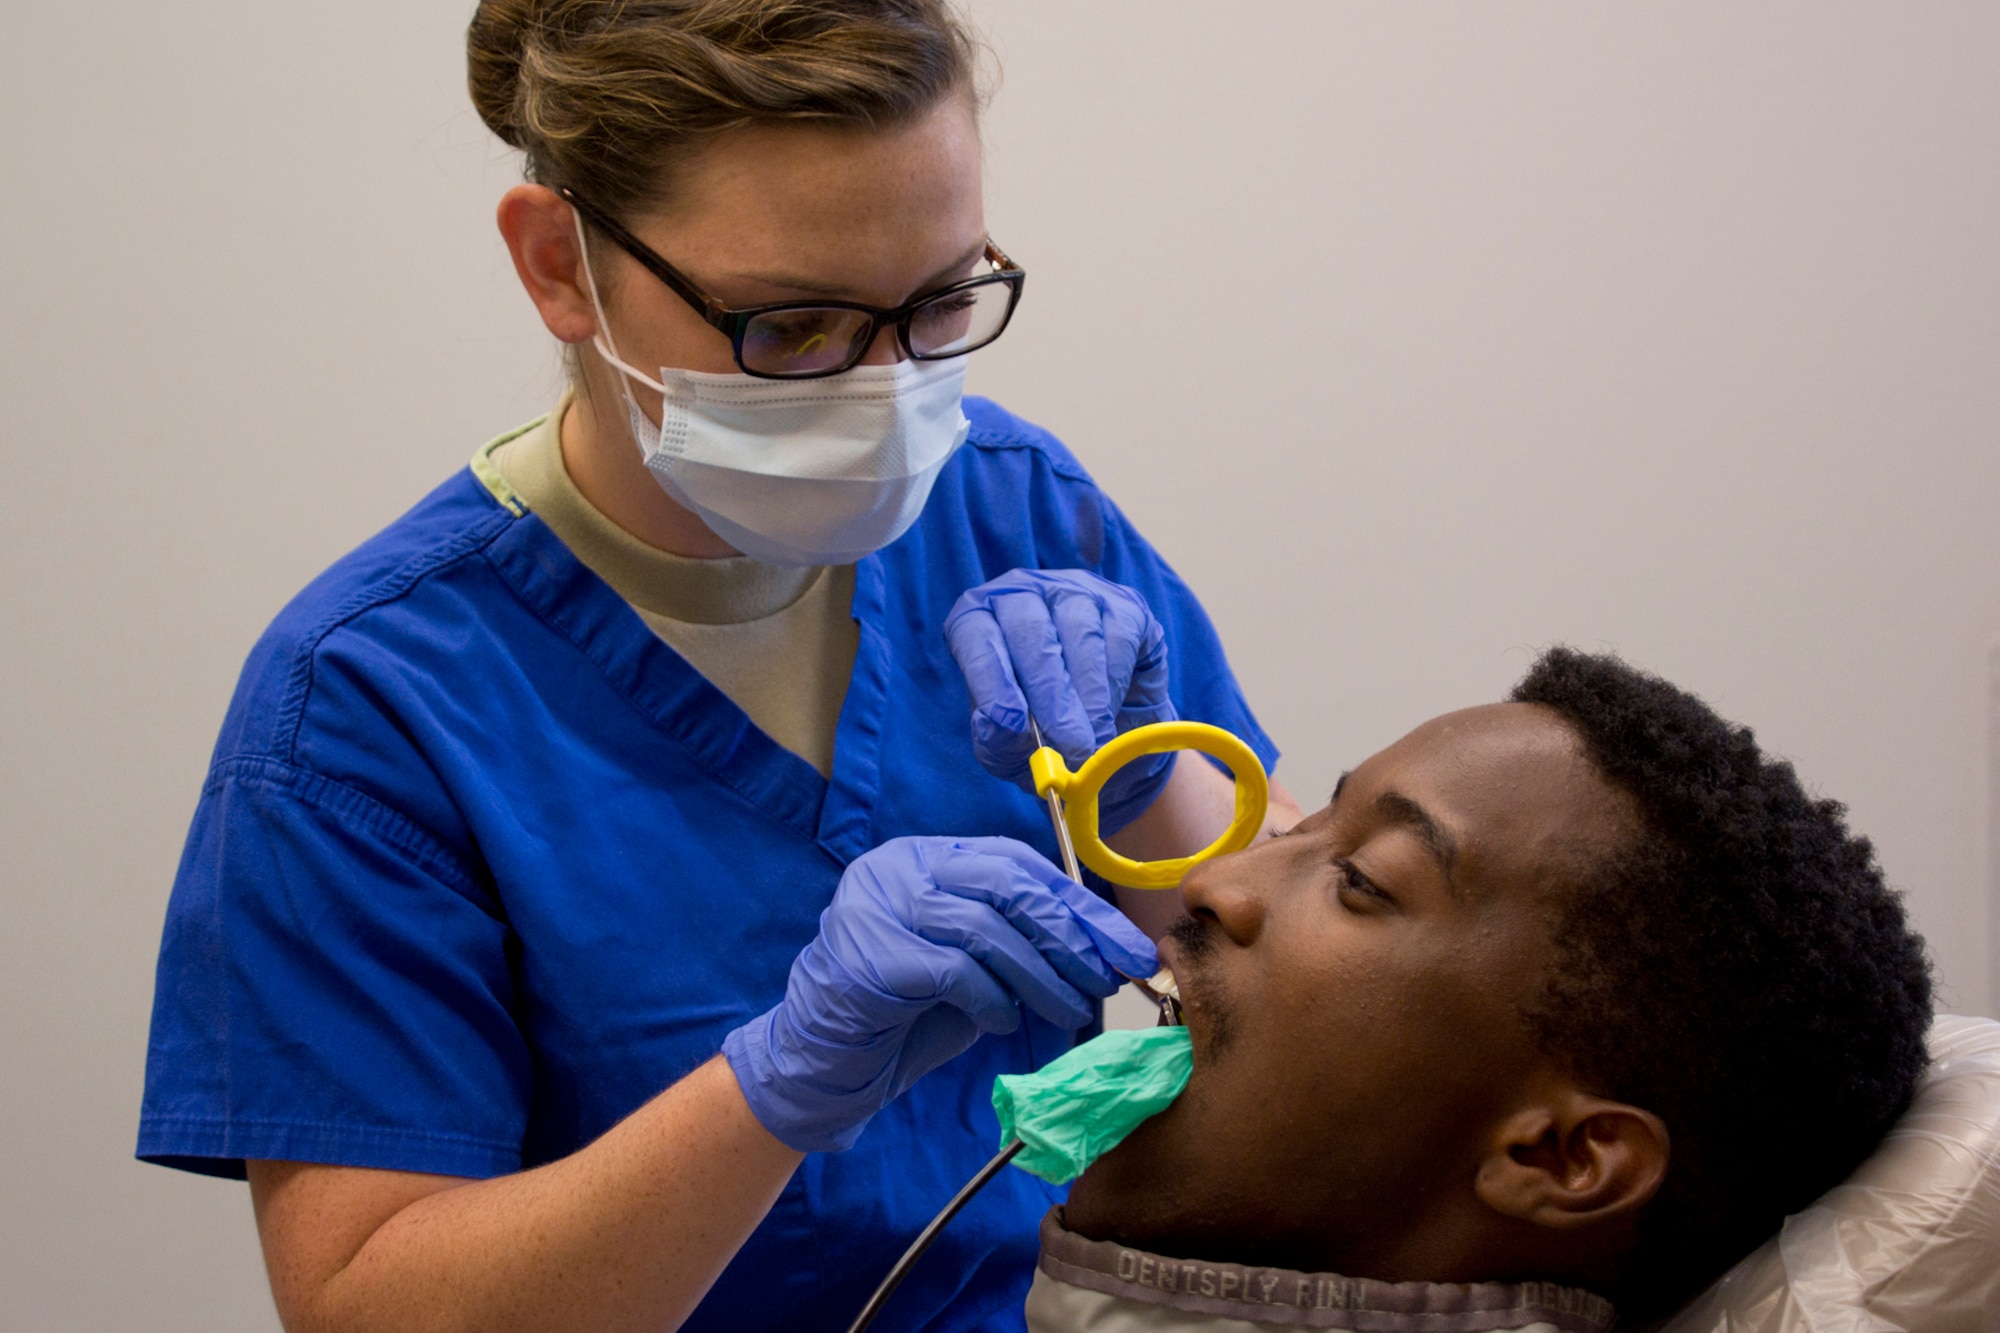 U.S. Air Force Reserve Senior Airman Carlie Creech, a 913th Aerospace Medical Squadron dental technician, prepares Senior Airman Eddie Lee Higgins, an air transportation journeyman assigned to the 96th Aerial Port Squadron, for an Xray during the Unit Training Assembly weekend at Little Rock Air Force Base, Ark., Aug. 5, 2017. The medical squadron helps ensure 913th Airlift Group Airmen are medically qualified to deploy worldwide. (U.S. Air Force photo by Master Sgt. Jeff Walston/Released)